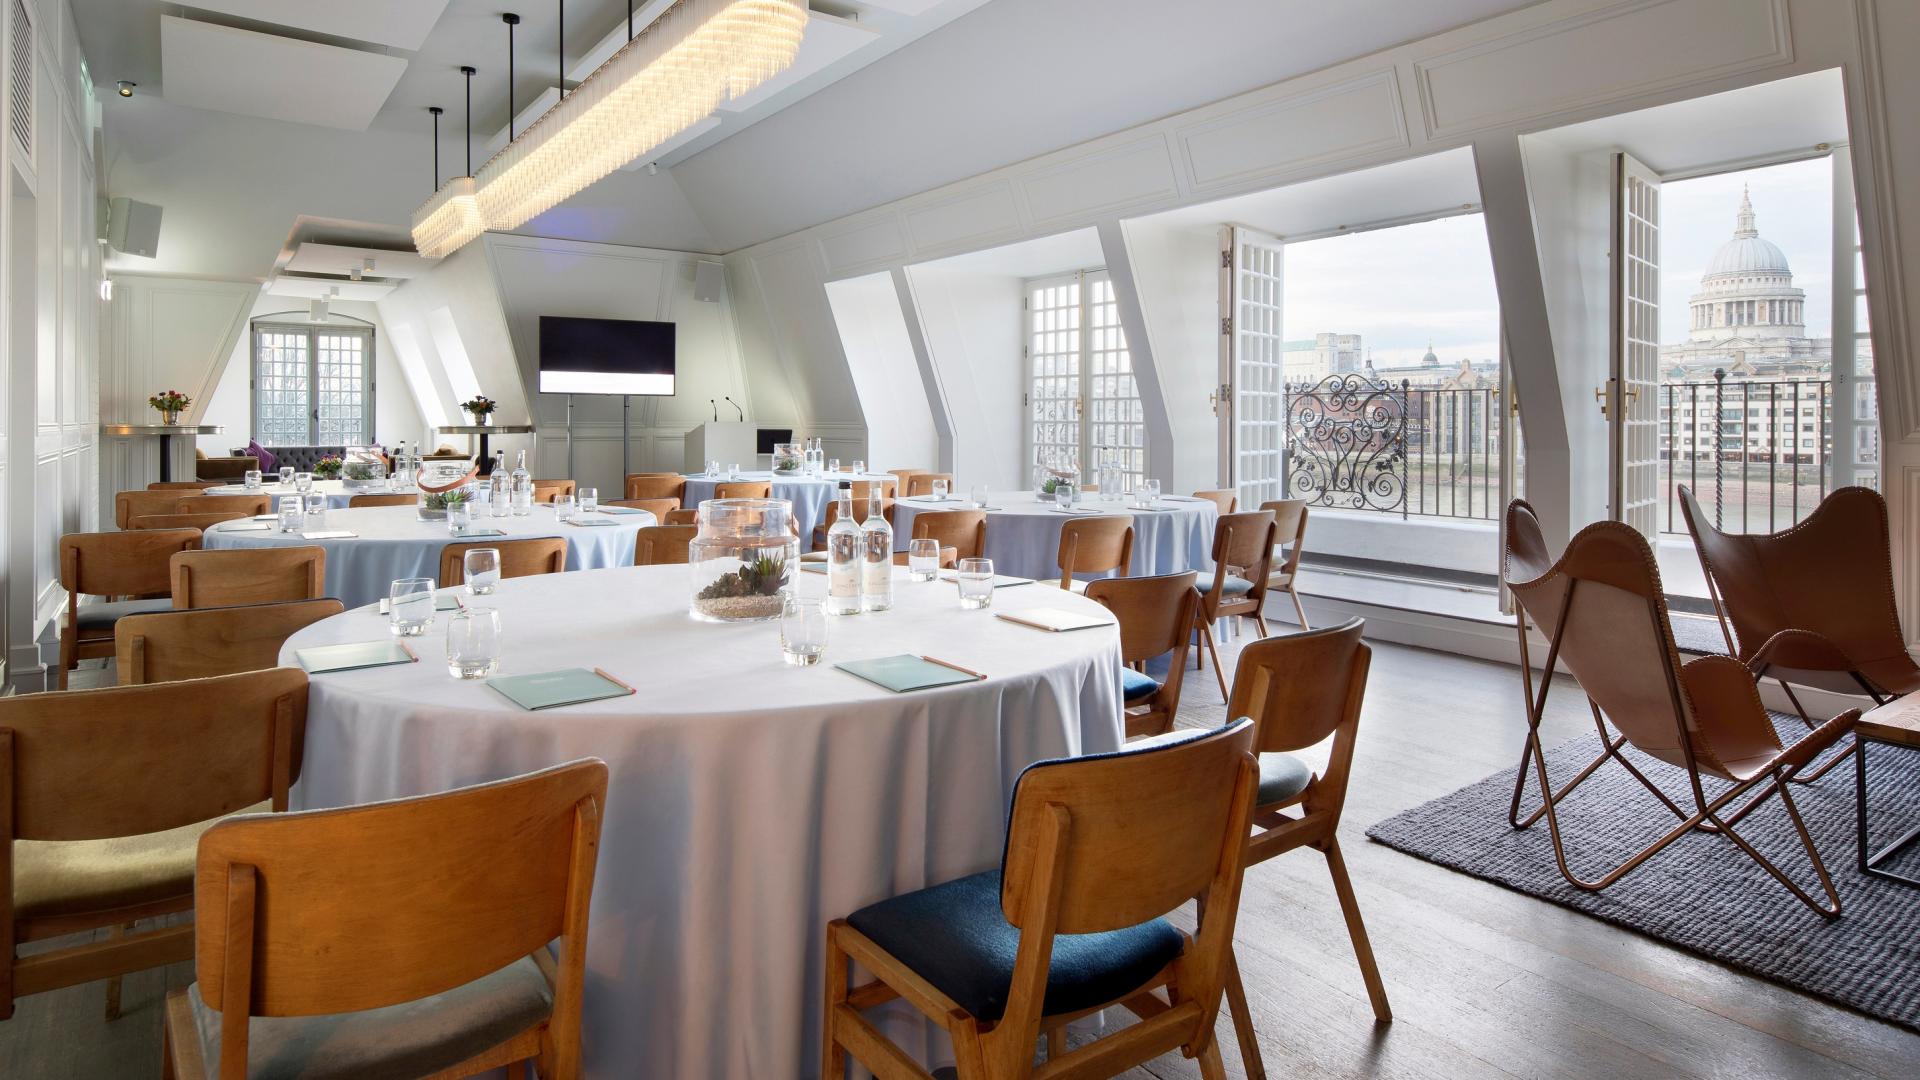 Function Rooms for Hire in Chelsea